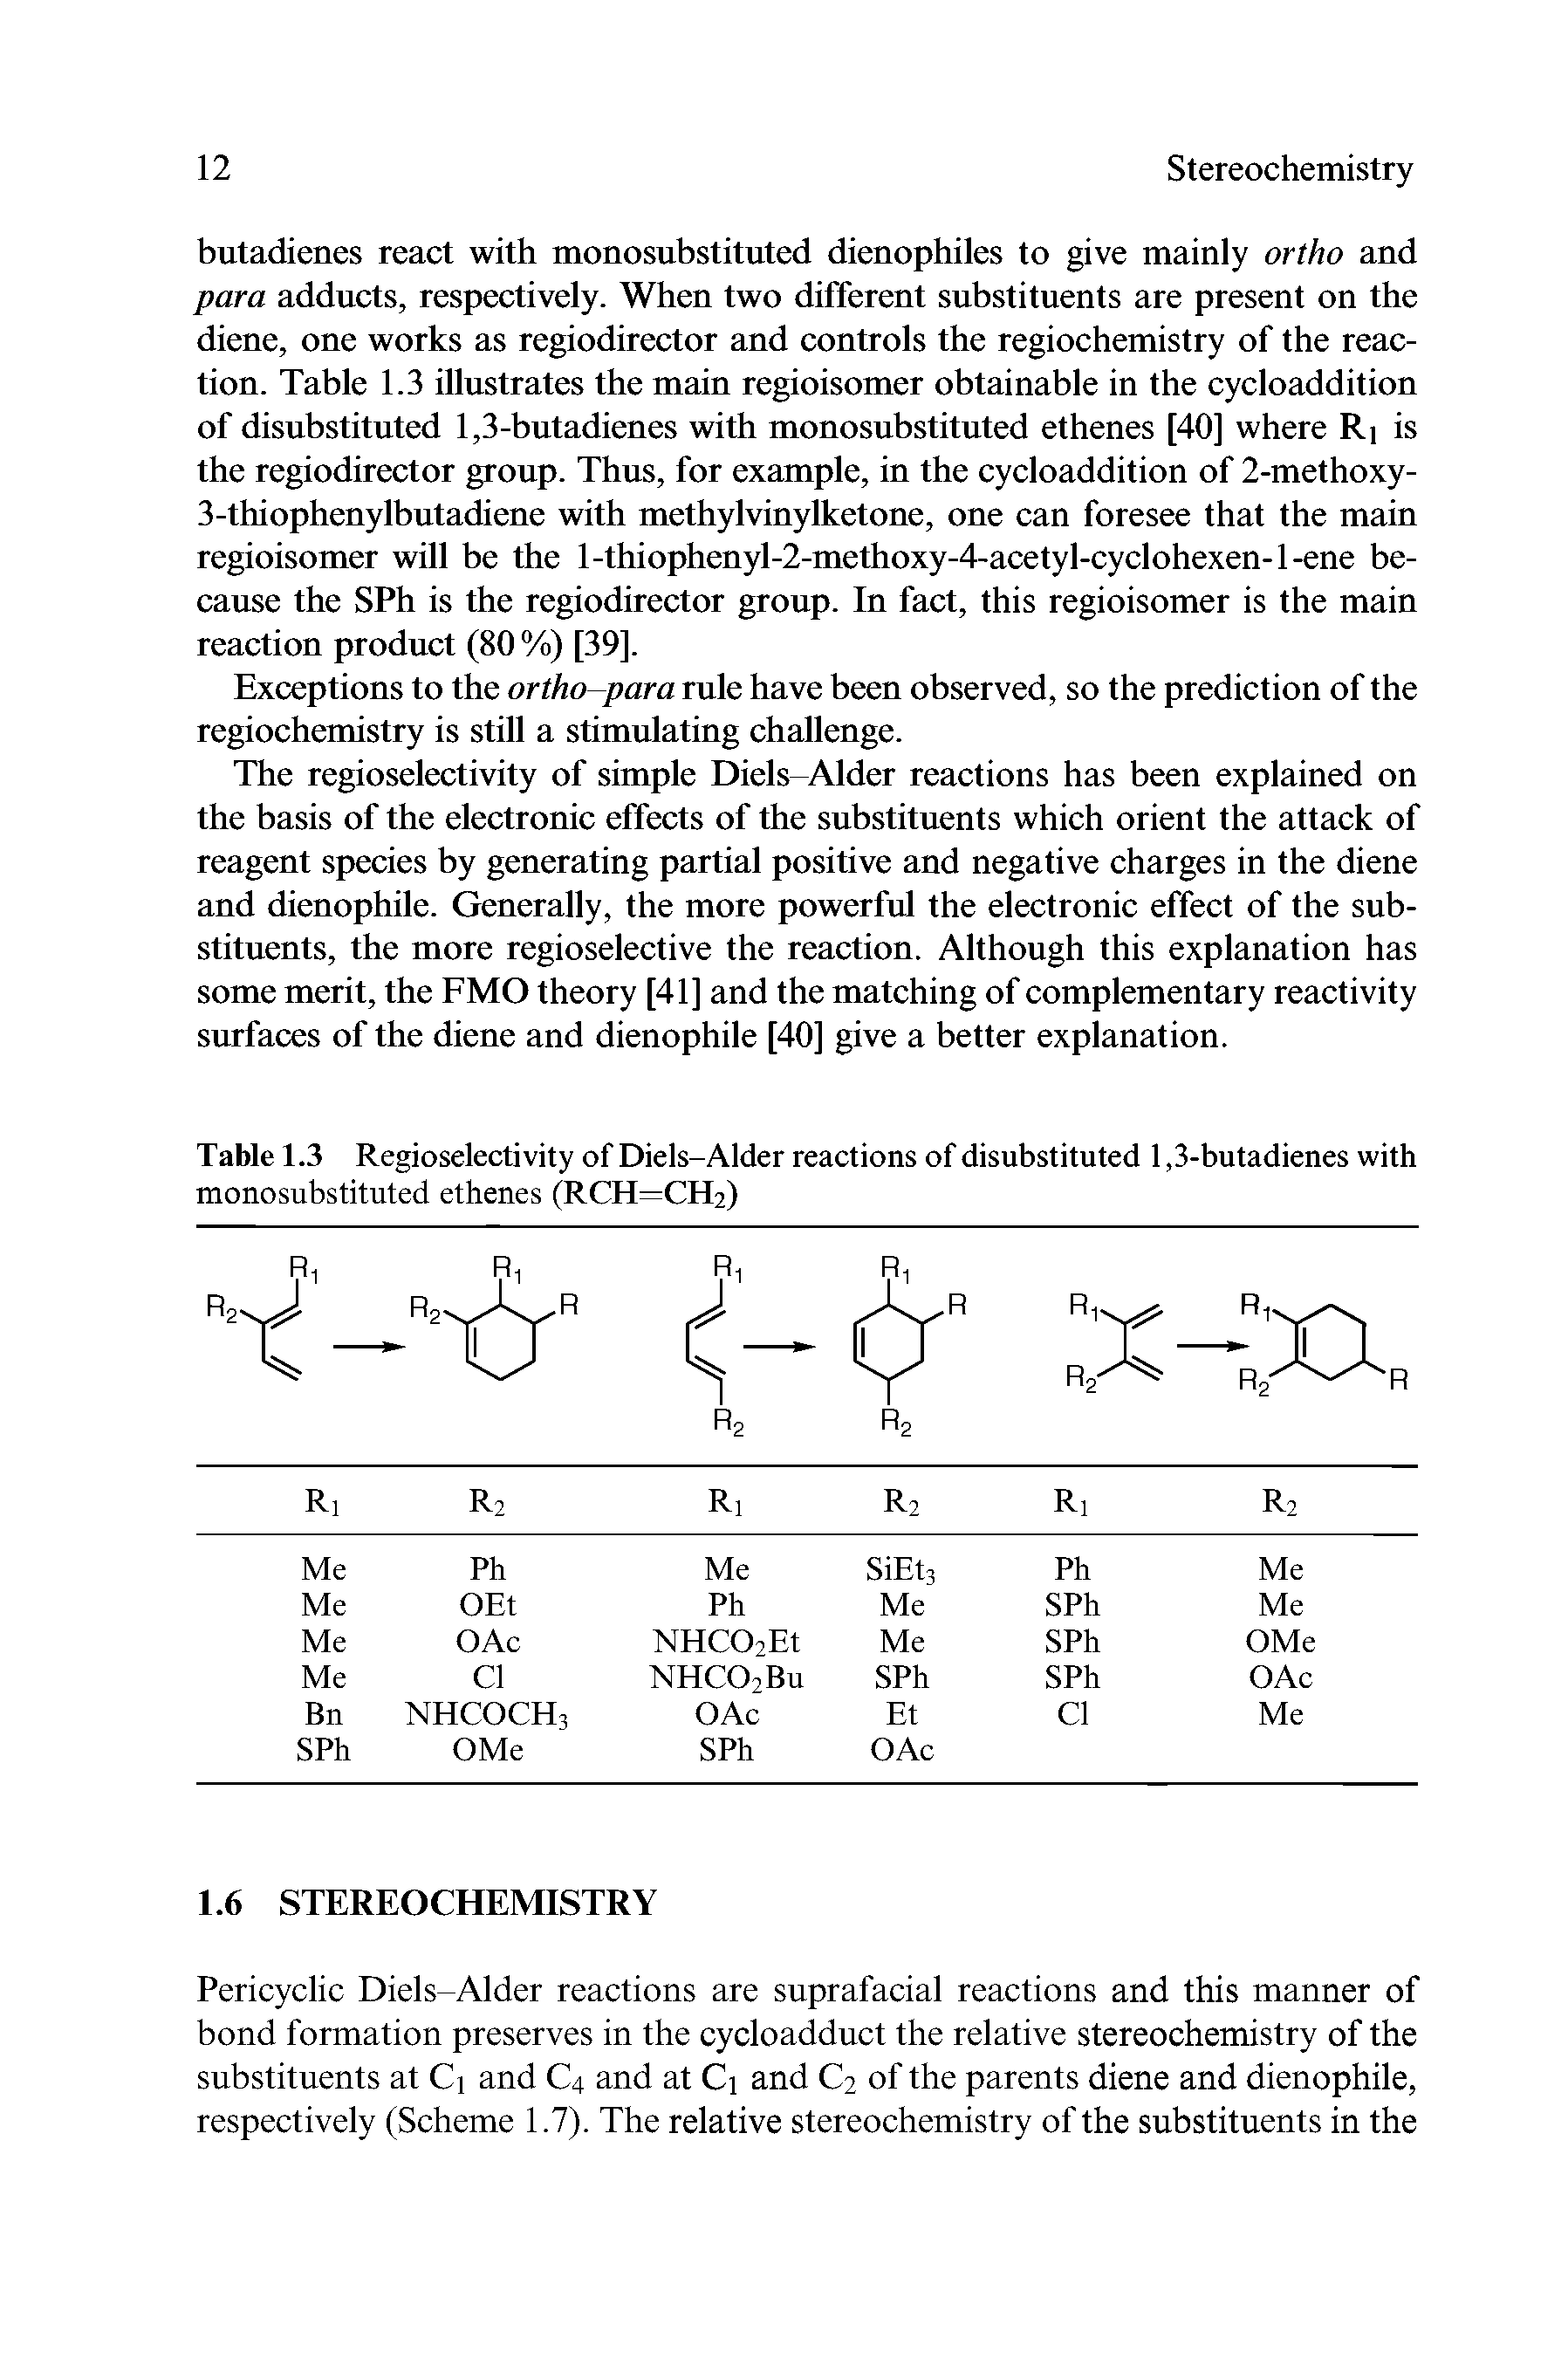 Table 1.3 Regioselectivity of Diels-Alder reactions of disubstituted 1,3-butadienes with monosubstituted ethenes (RCH=CH2)...